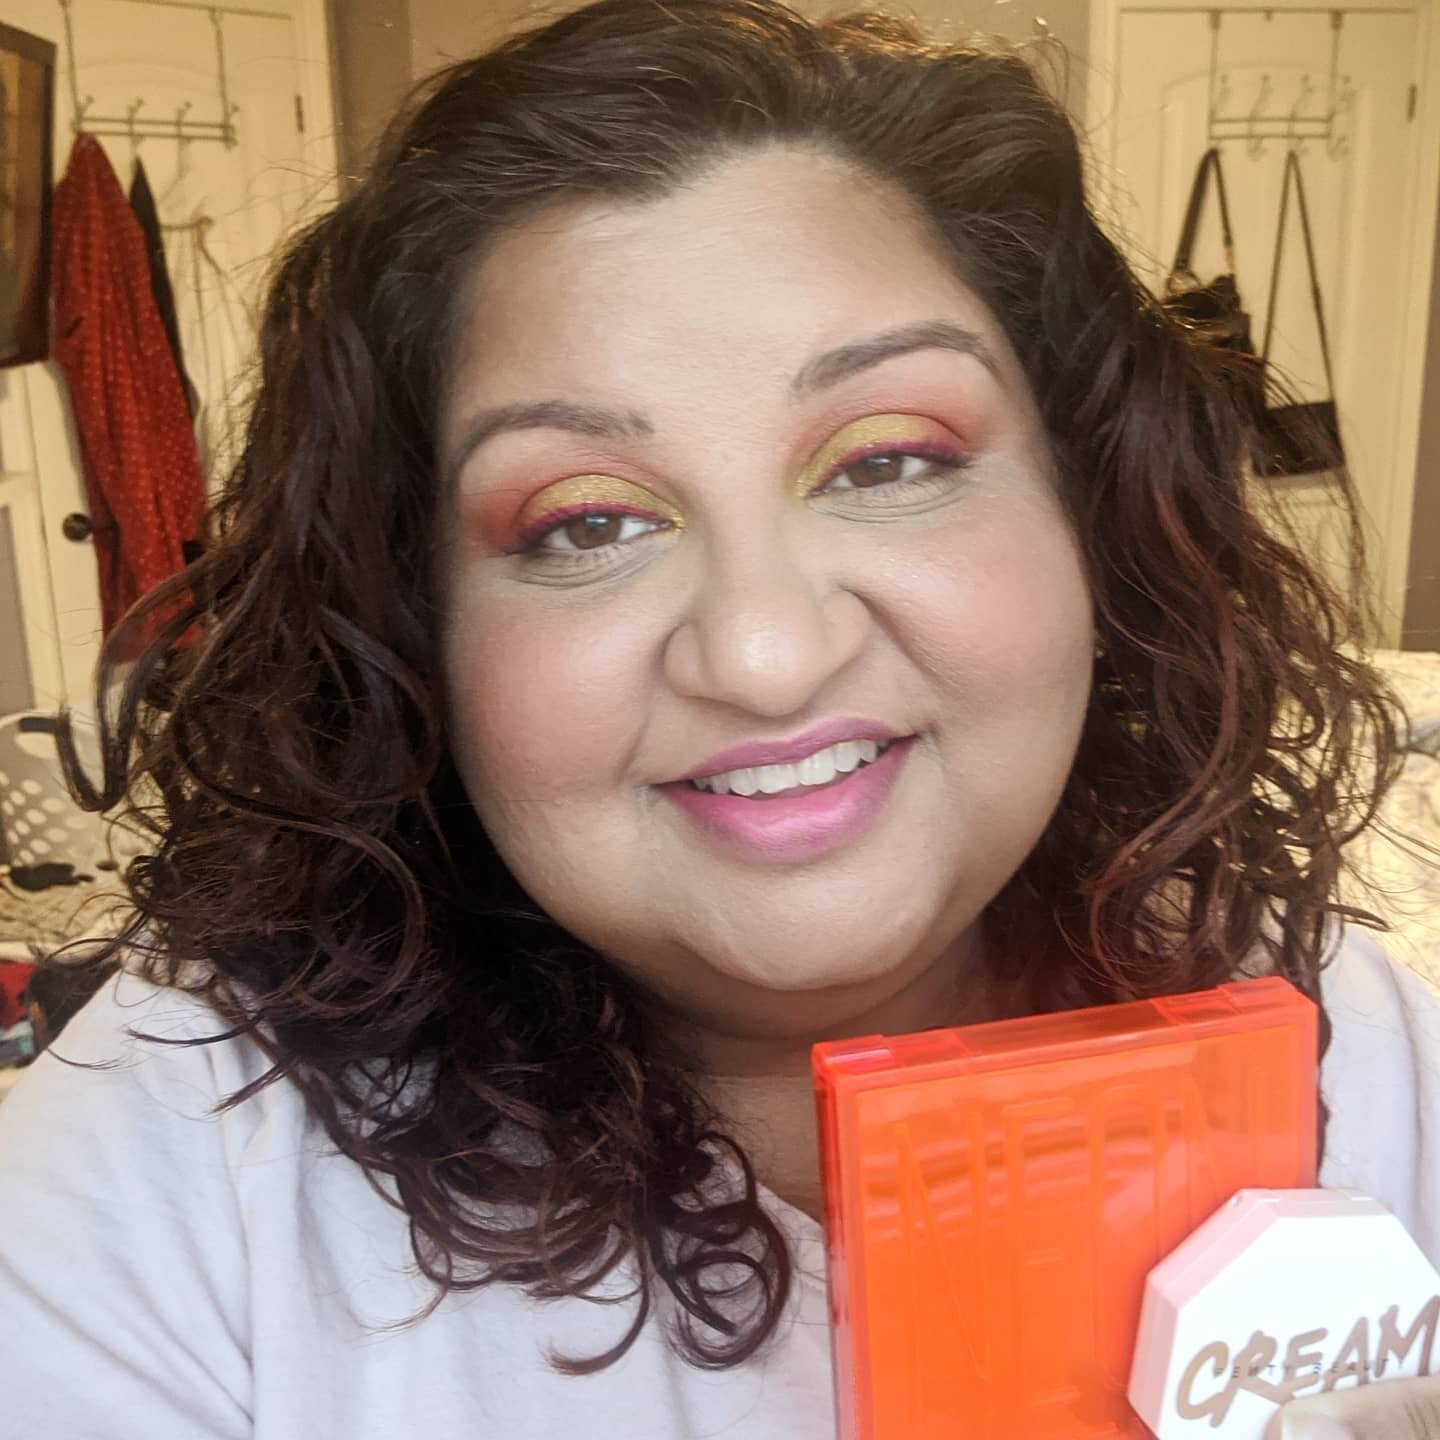 I recently tried two products I've been dying to get my hands on -- the @hudabeauty Neon Obsessions Palette in Neon Orange and @fentybeauty Cheeks Out Freestyle Cream Blush in Strawberry Drip. See my reviews 👇🏽! ✨
Huda Neon Obsessions: I was so exc